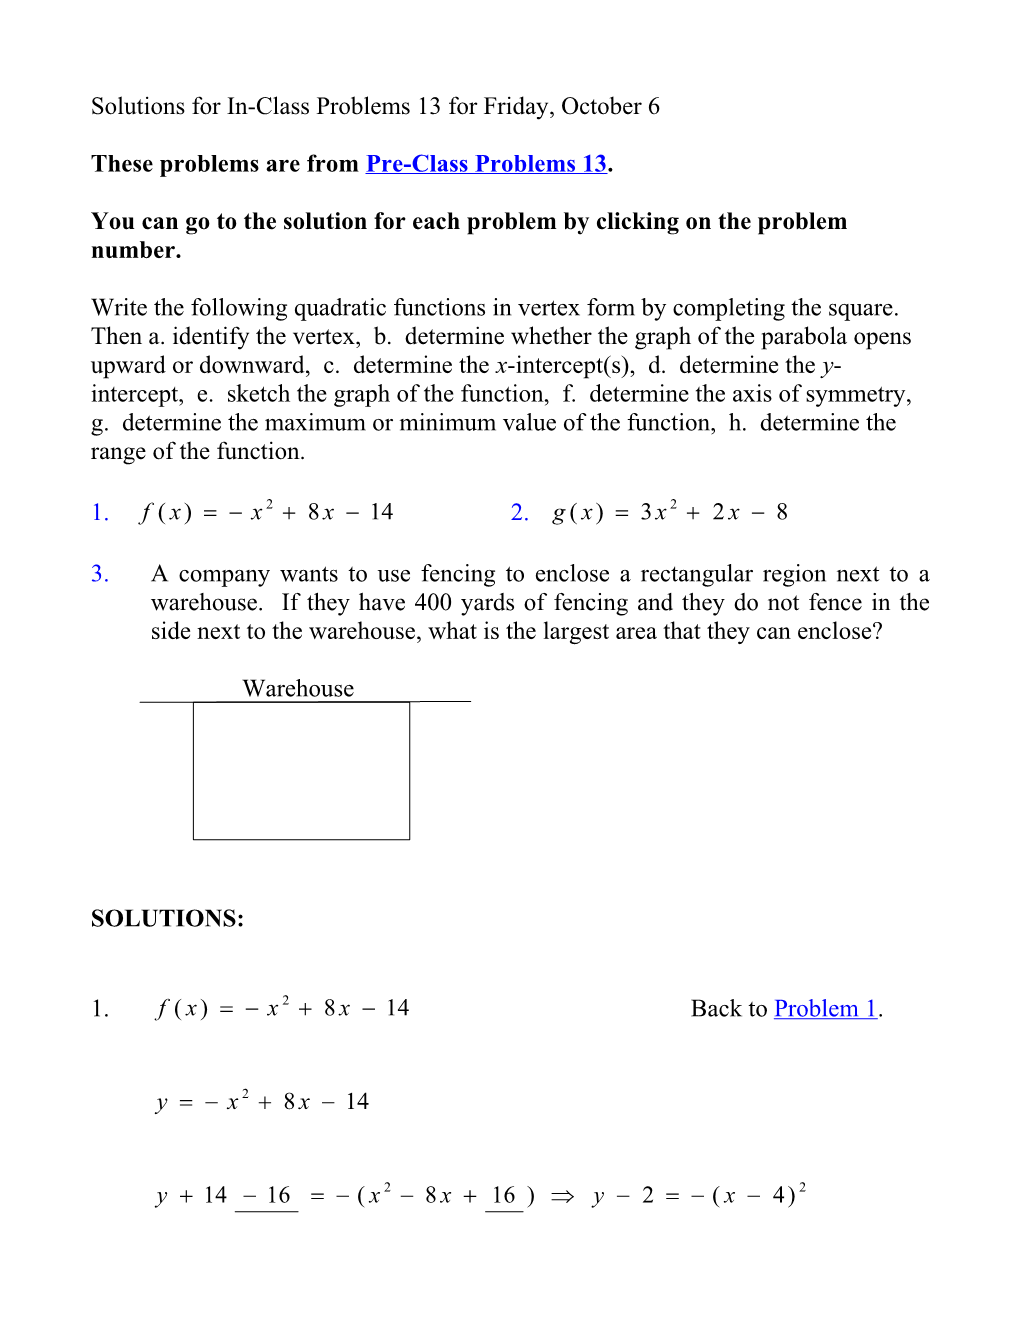 These Problems Are from Pre-Class Problems 13